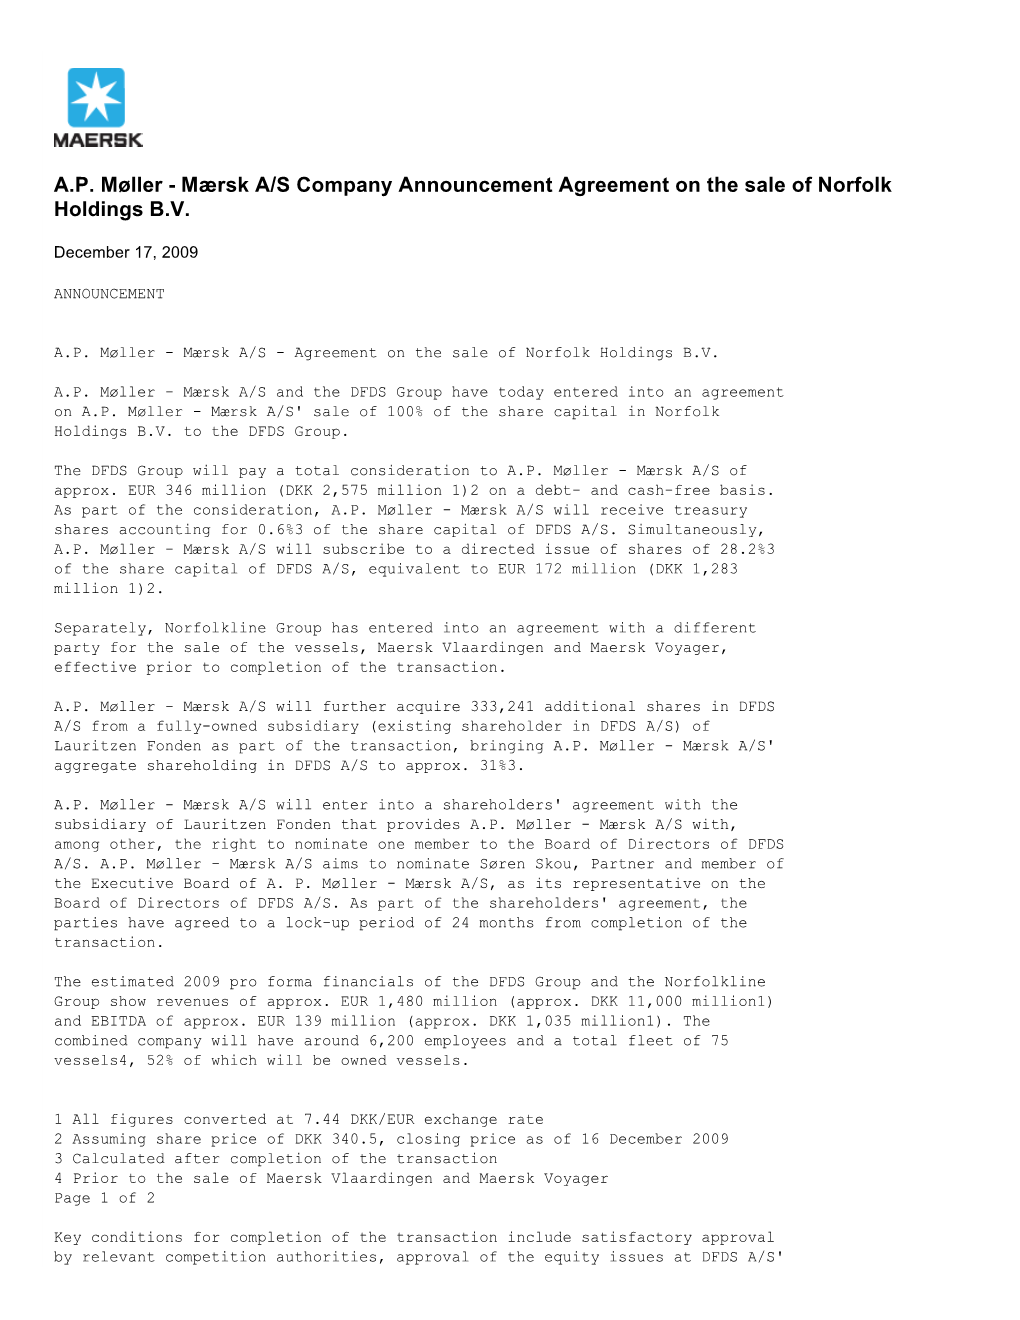 Mærsk A/S Company Announcement Agreement on the Sale of Norfolk Holdings B.V